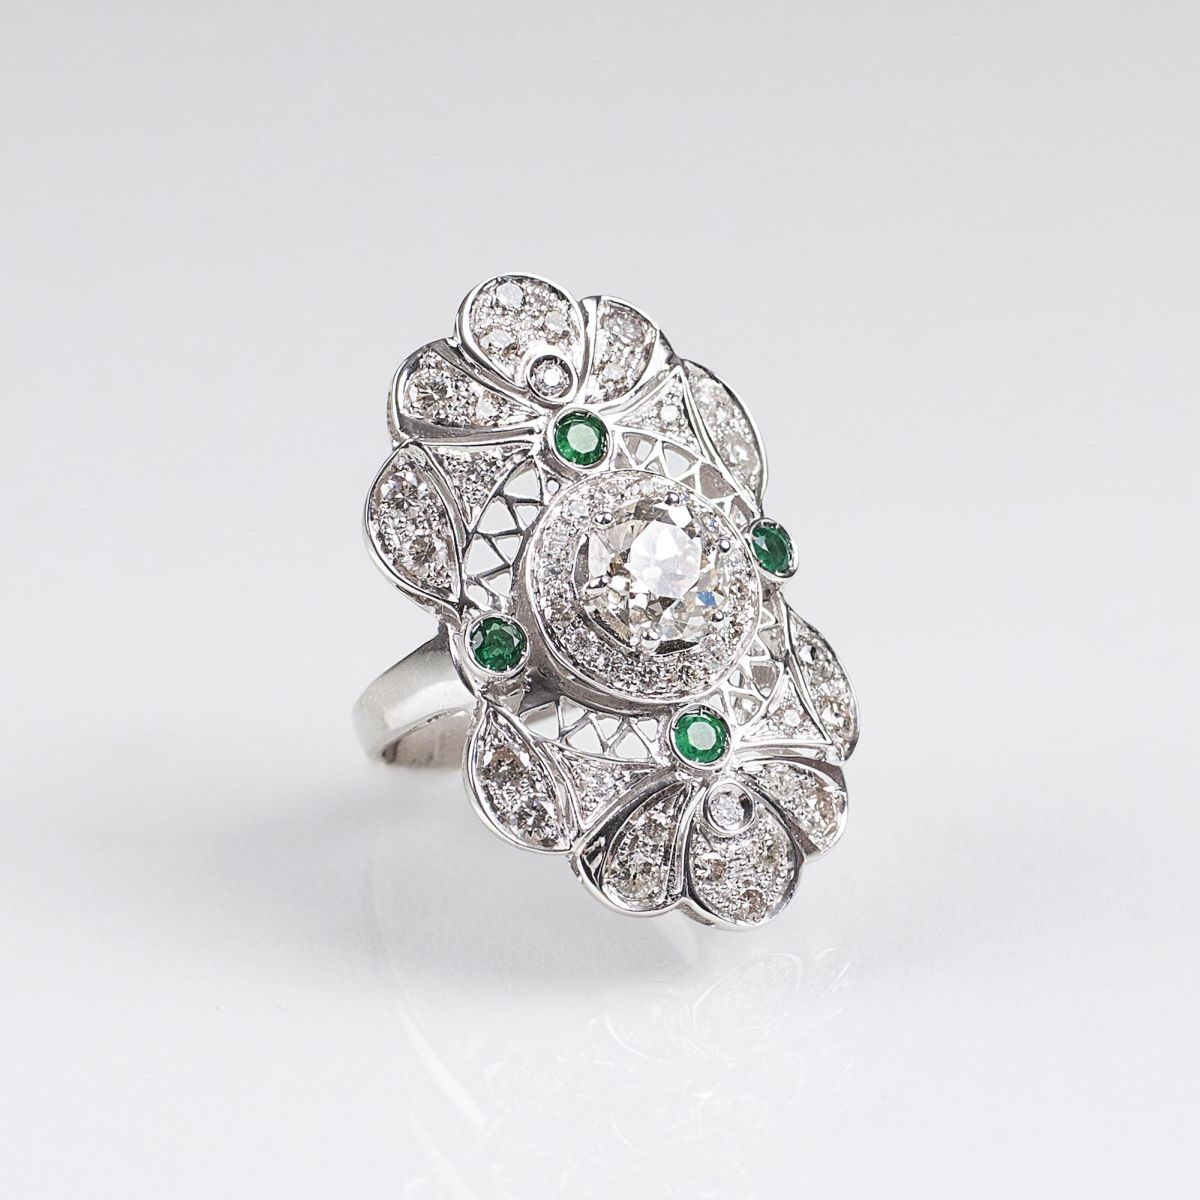 A large Emerald Diamond Ring with Old European Cut Solitaire Diamond